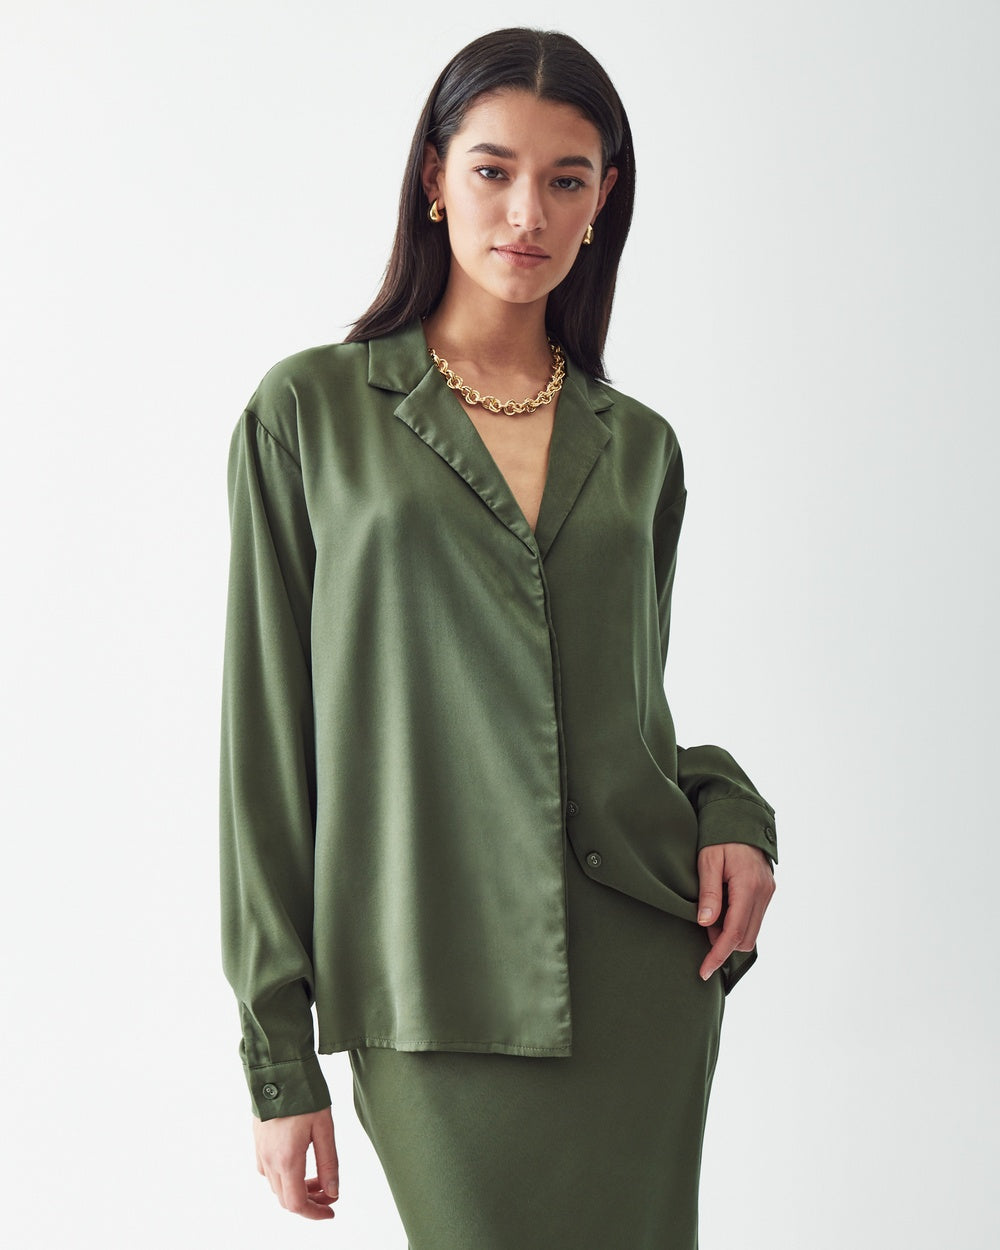 A button shirt in an Olive option